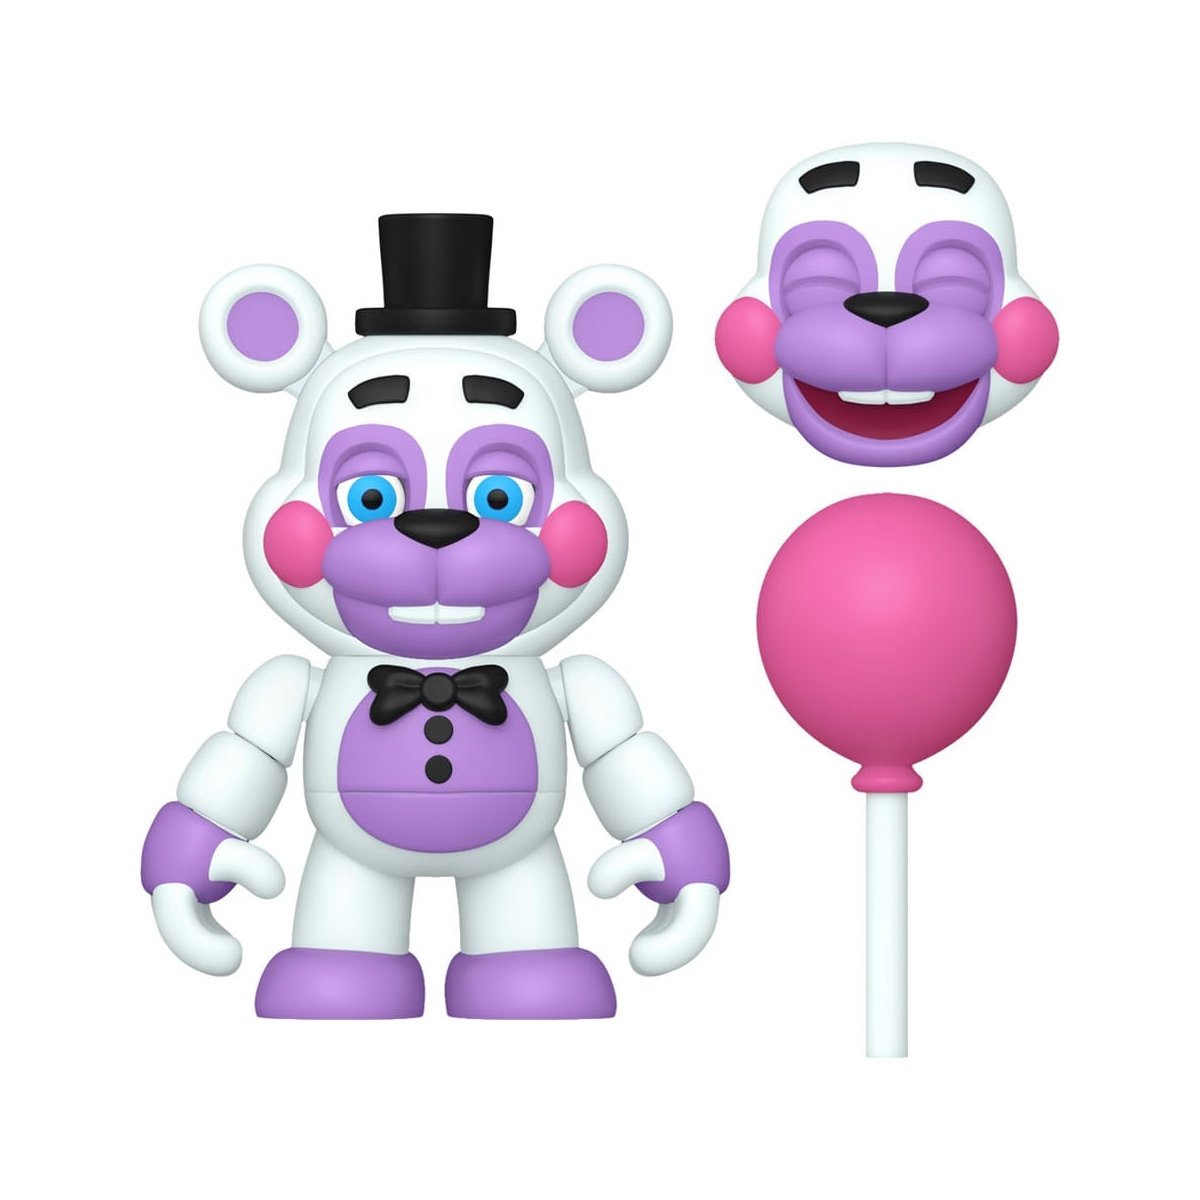 Five Nights at Freddy's - Figurine Snap Helpy 9 cm